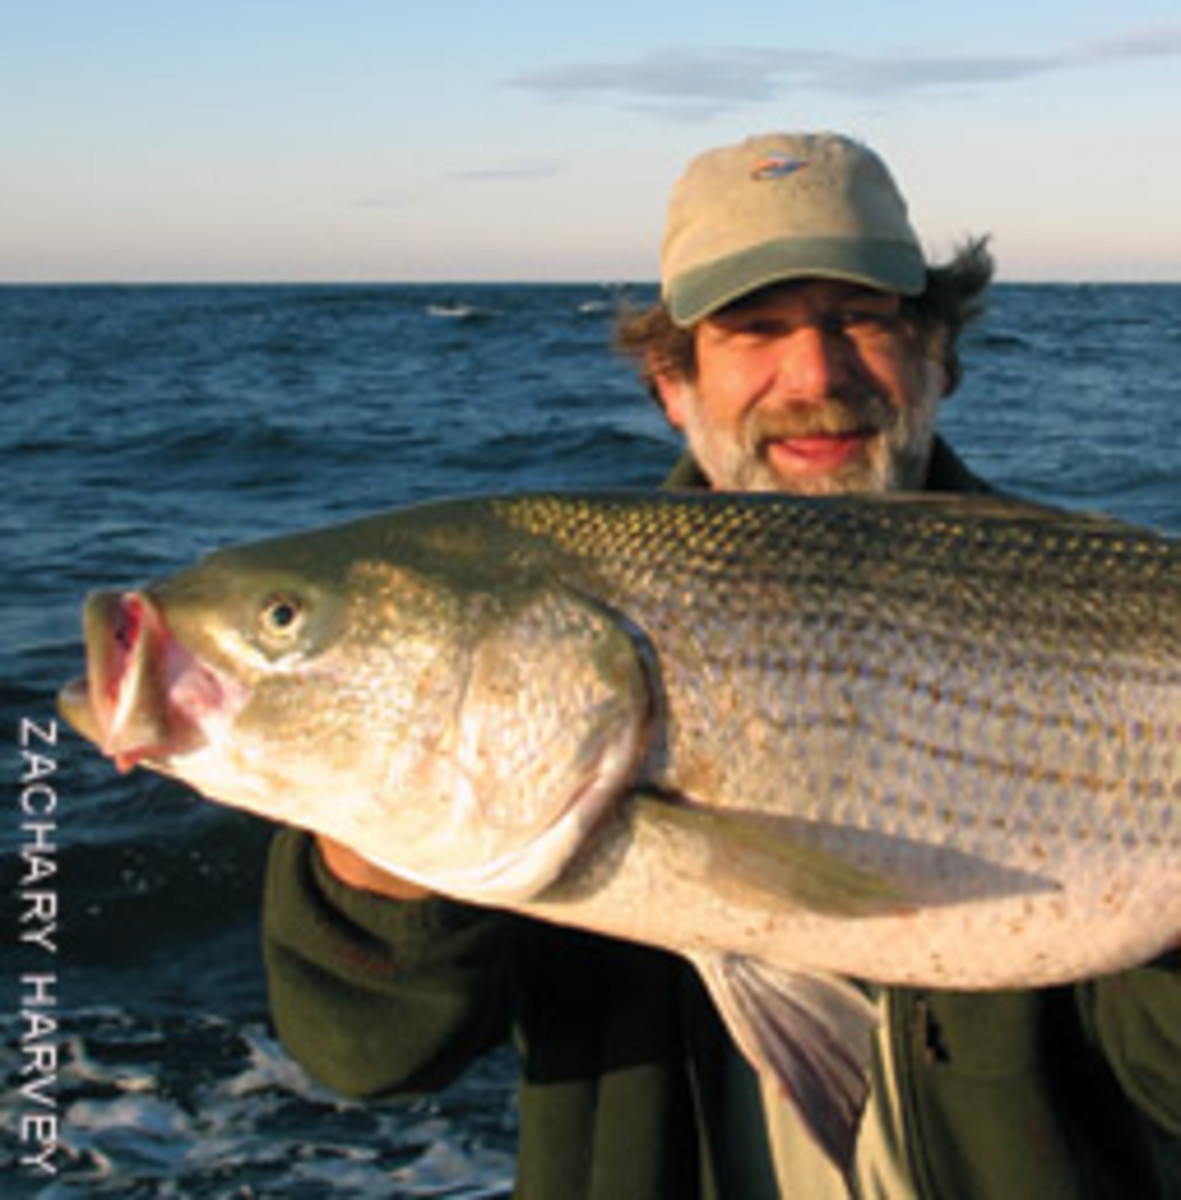 Most of the anglers who consistently bring in big fish are out on the grounds every fishable day.